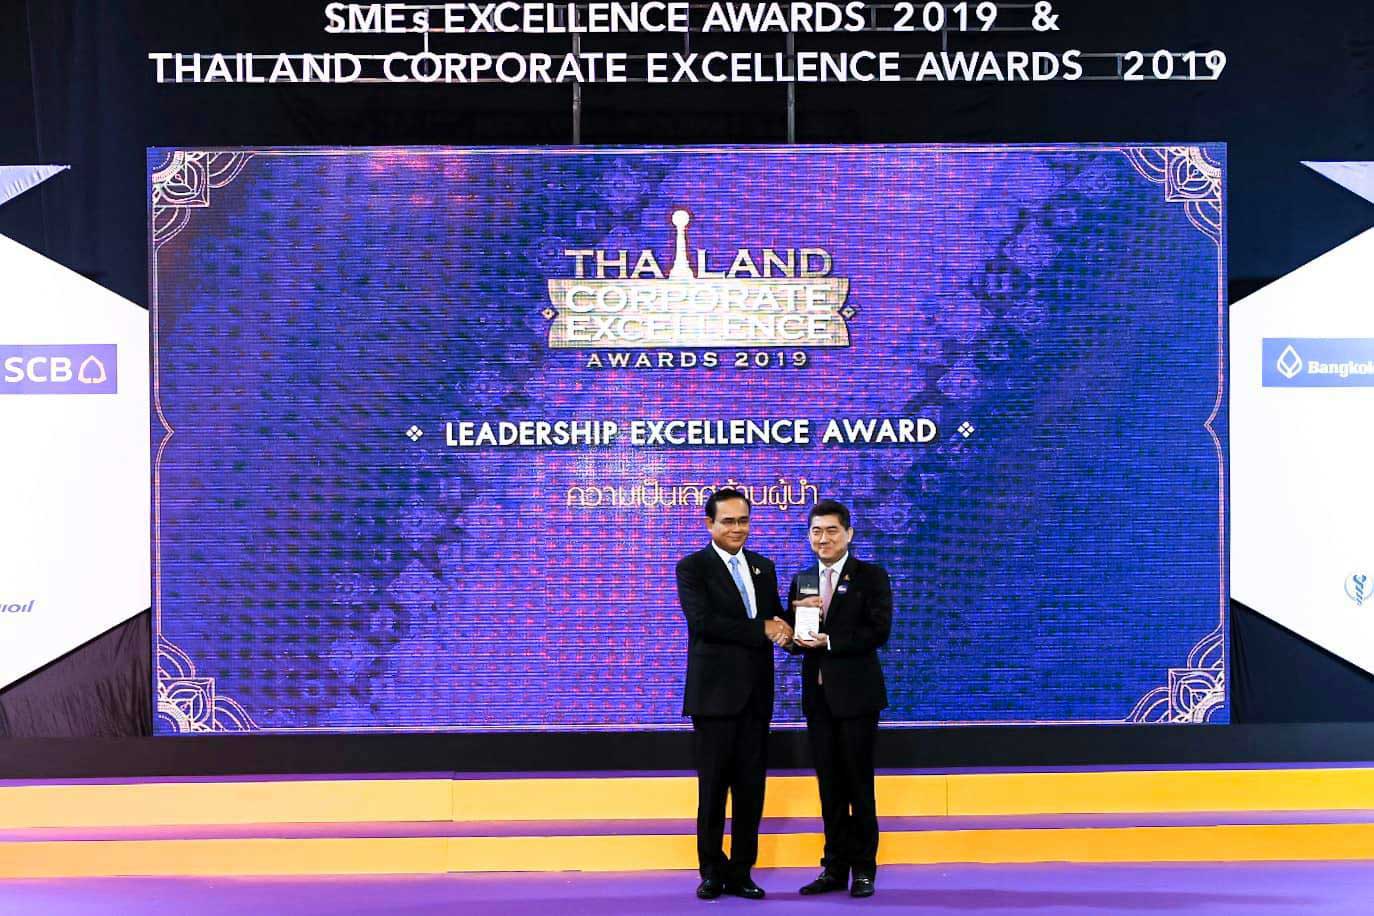 CP Foods won an award from Thailand Corporate Excellence Awards 2019